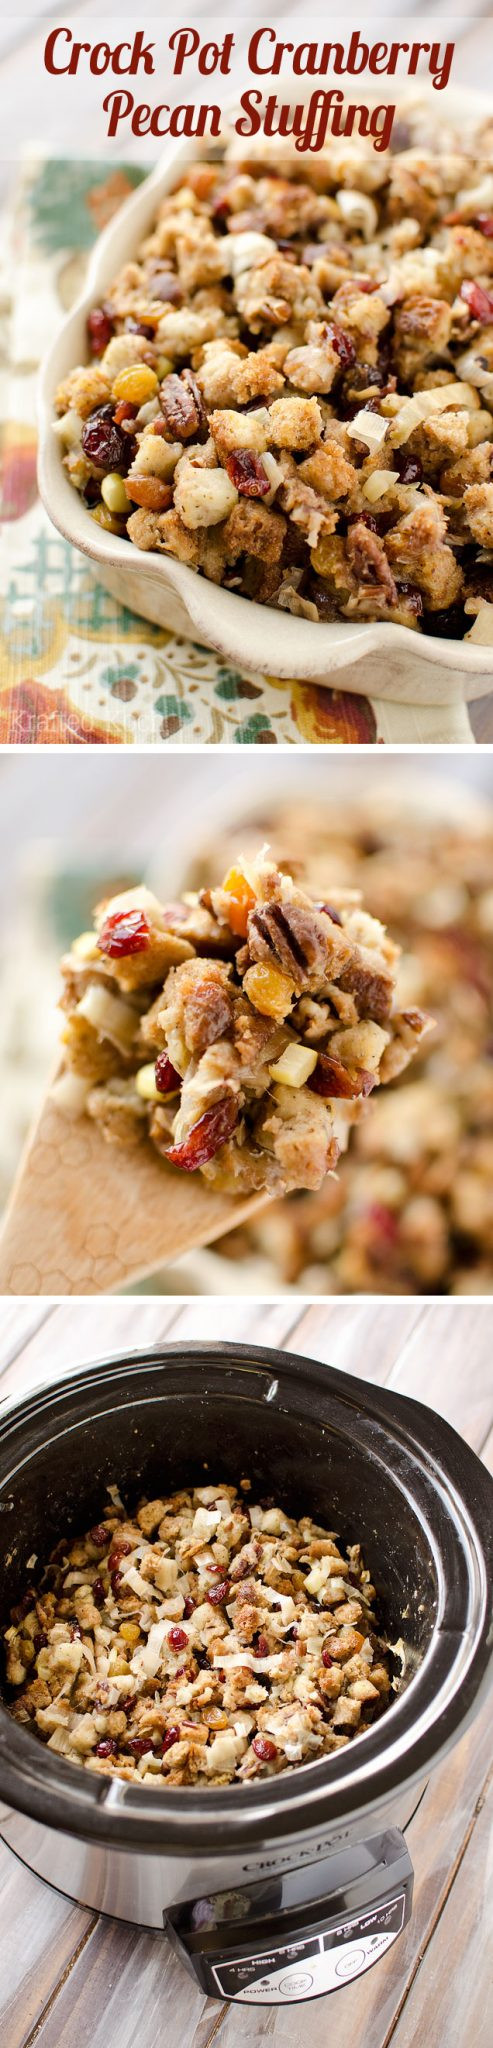 Thanksgiving Side Dishes Slow Cooker
 Crock Pot Cranberry Pecan Stuffing